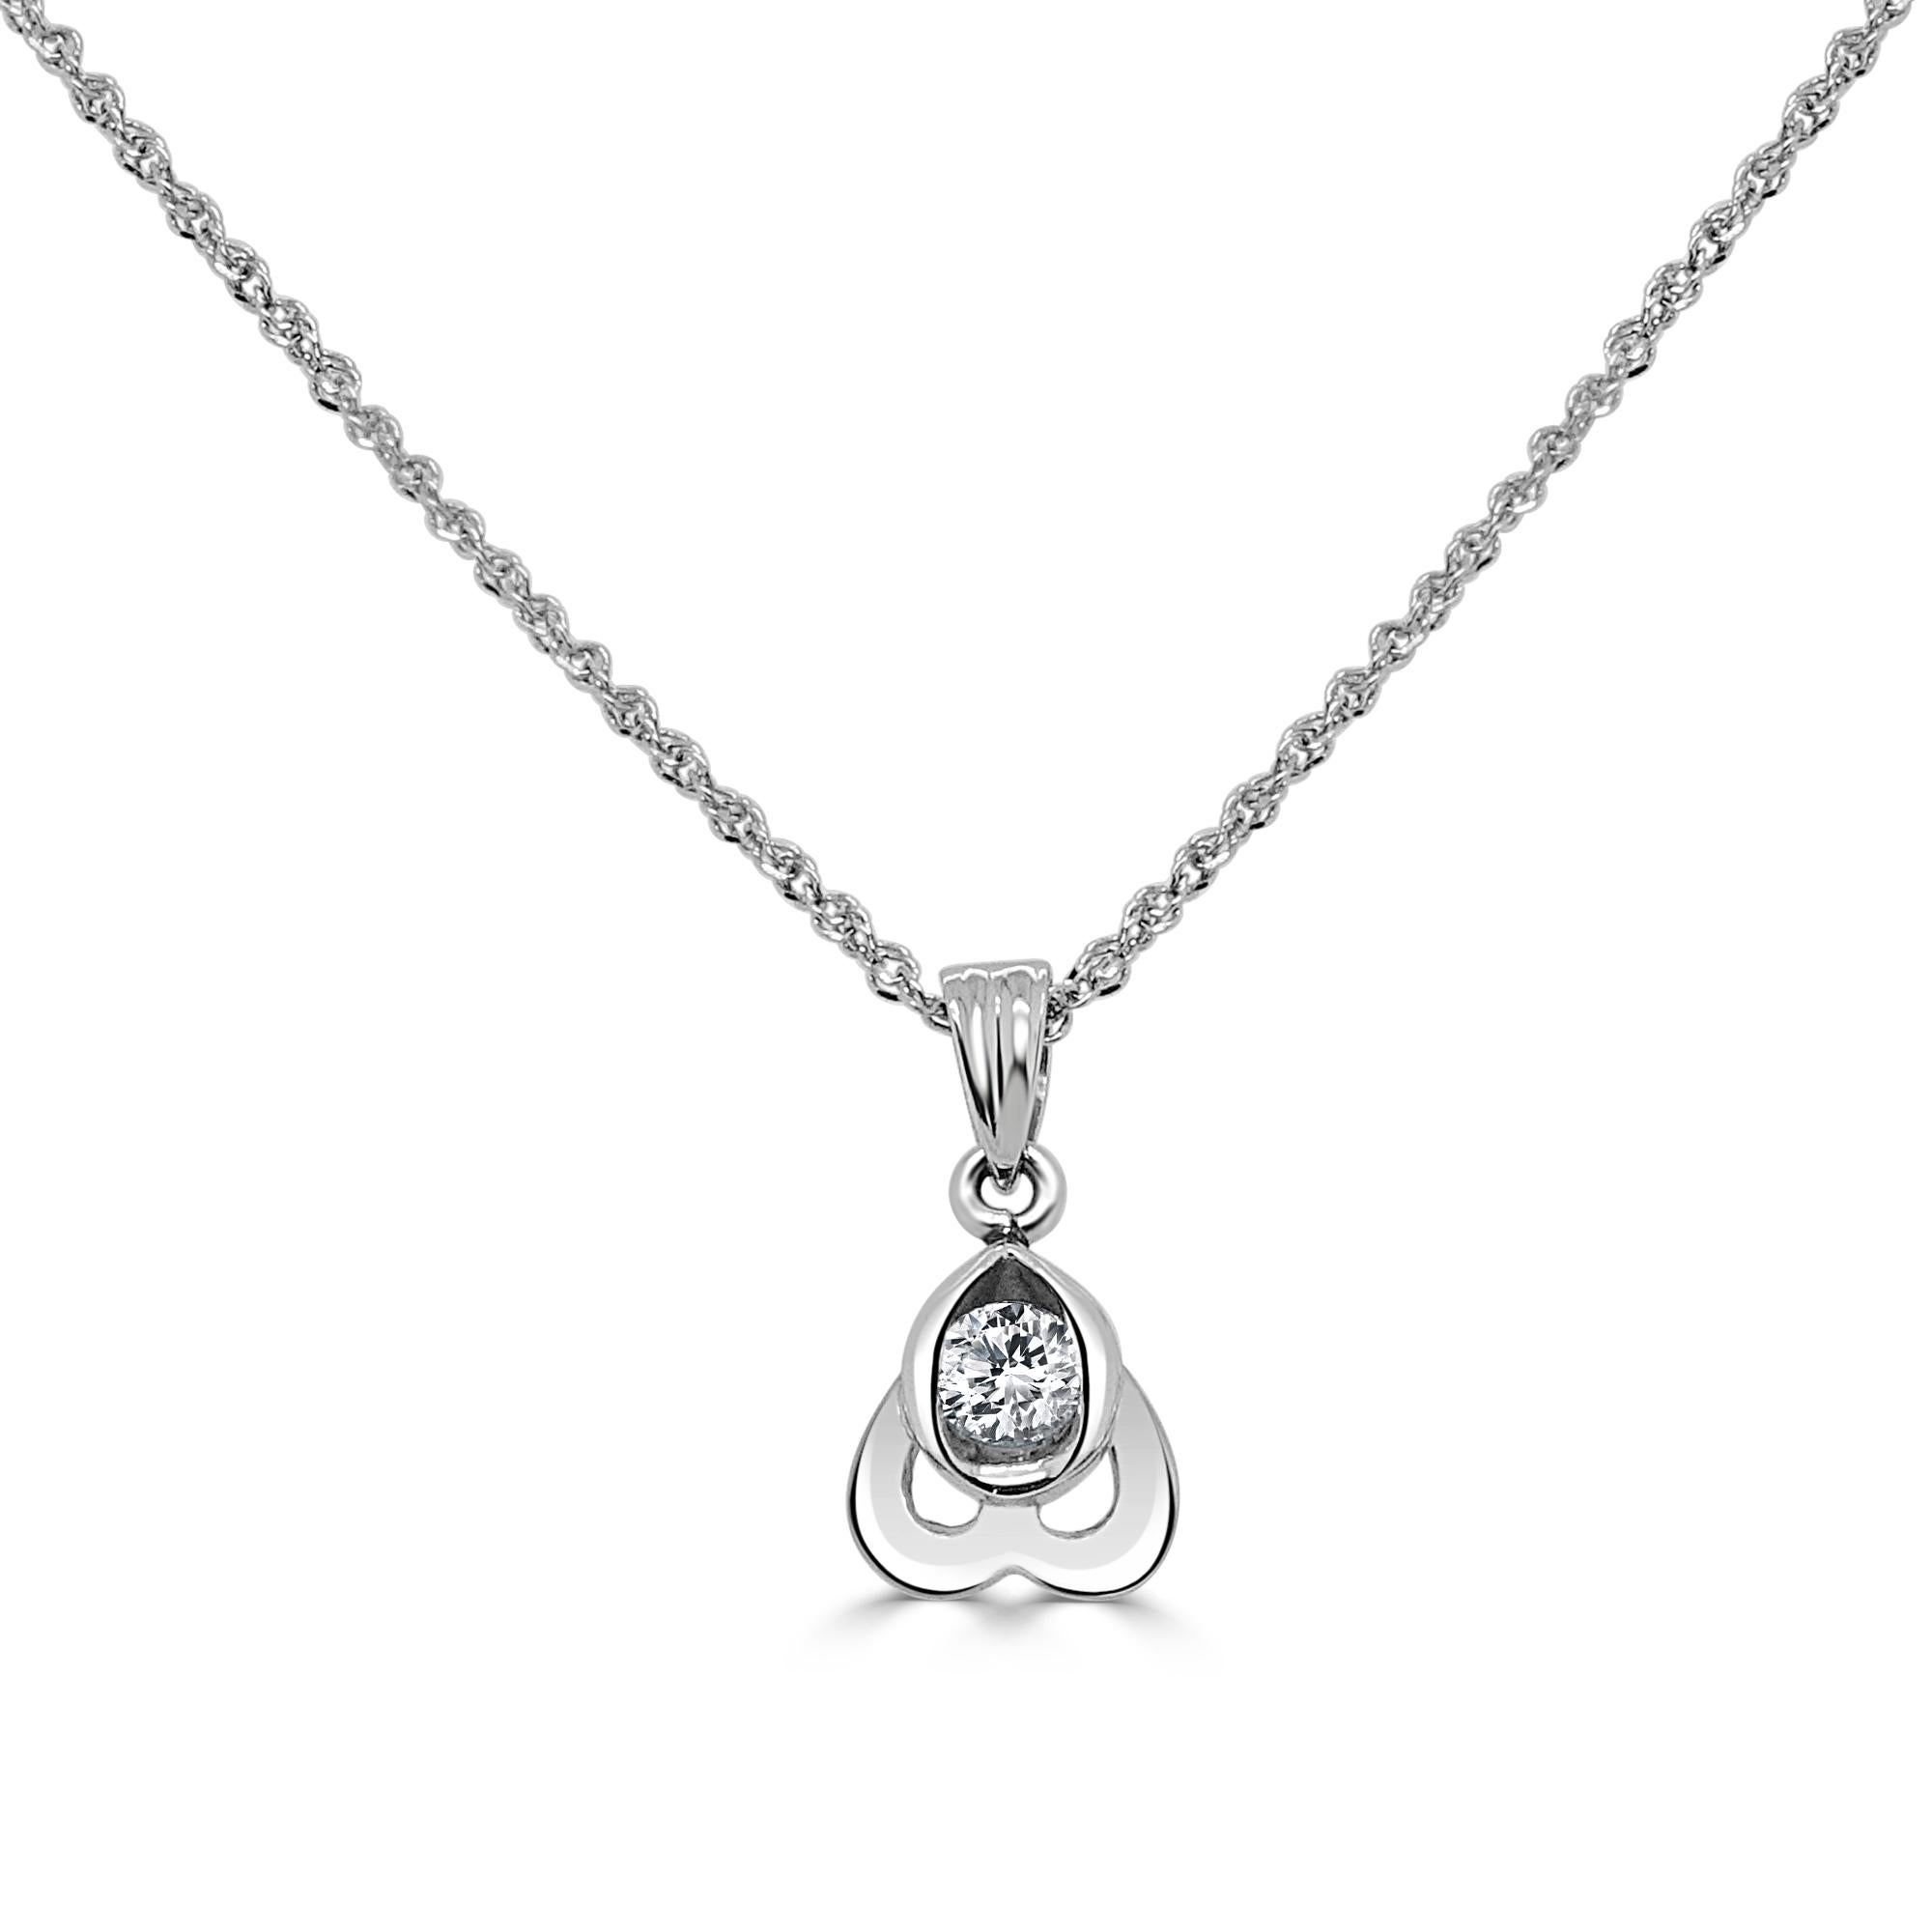 18 Karat White Gold 0.13 Carat Diamond Chain Necklace Wedding Fine Jewelry 

Gentle and elegant pendant is crafted in a sleek white gold. Featuring round cut diamonds, together totaling 0.13 TCW . Suspended from a 16-inch stunning non-tangle, non